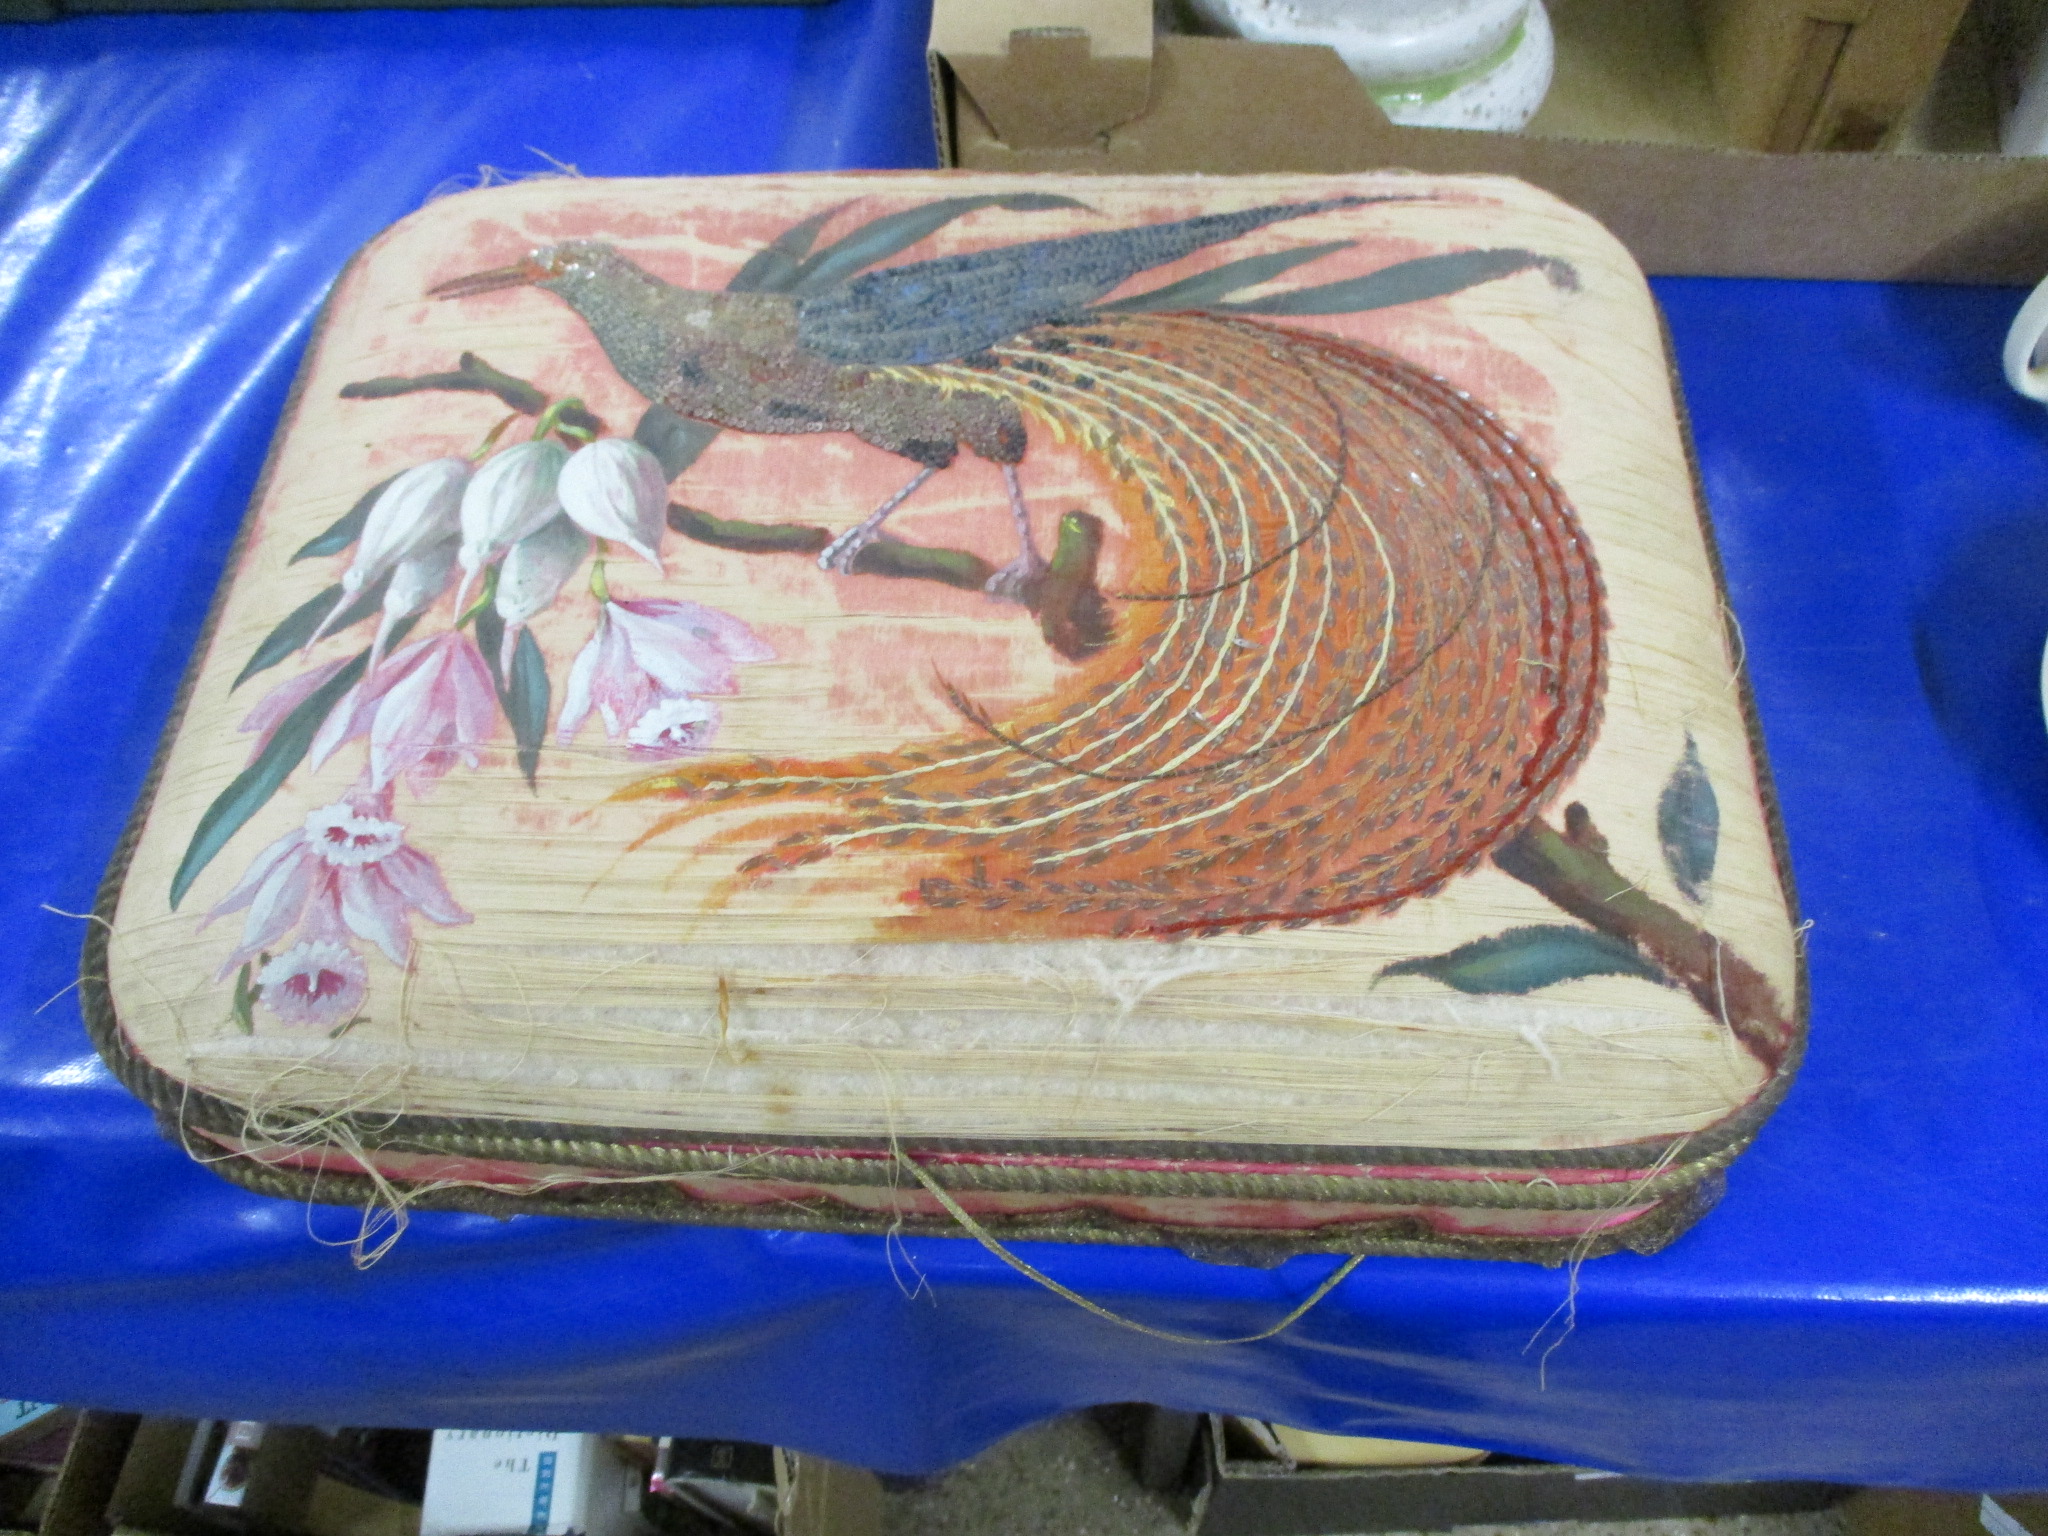 BOX WITH EMBROIDERED BIRDS TO COVER